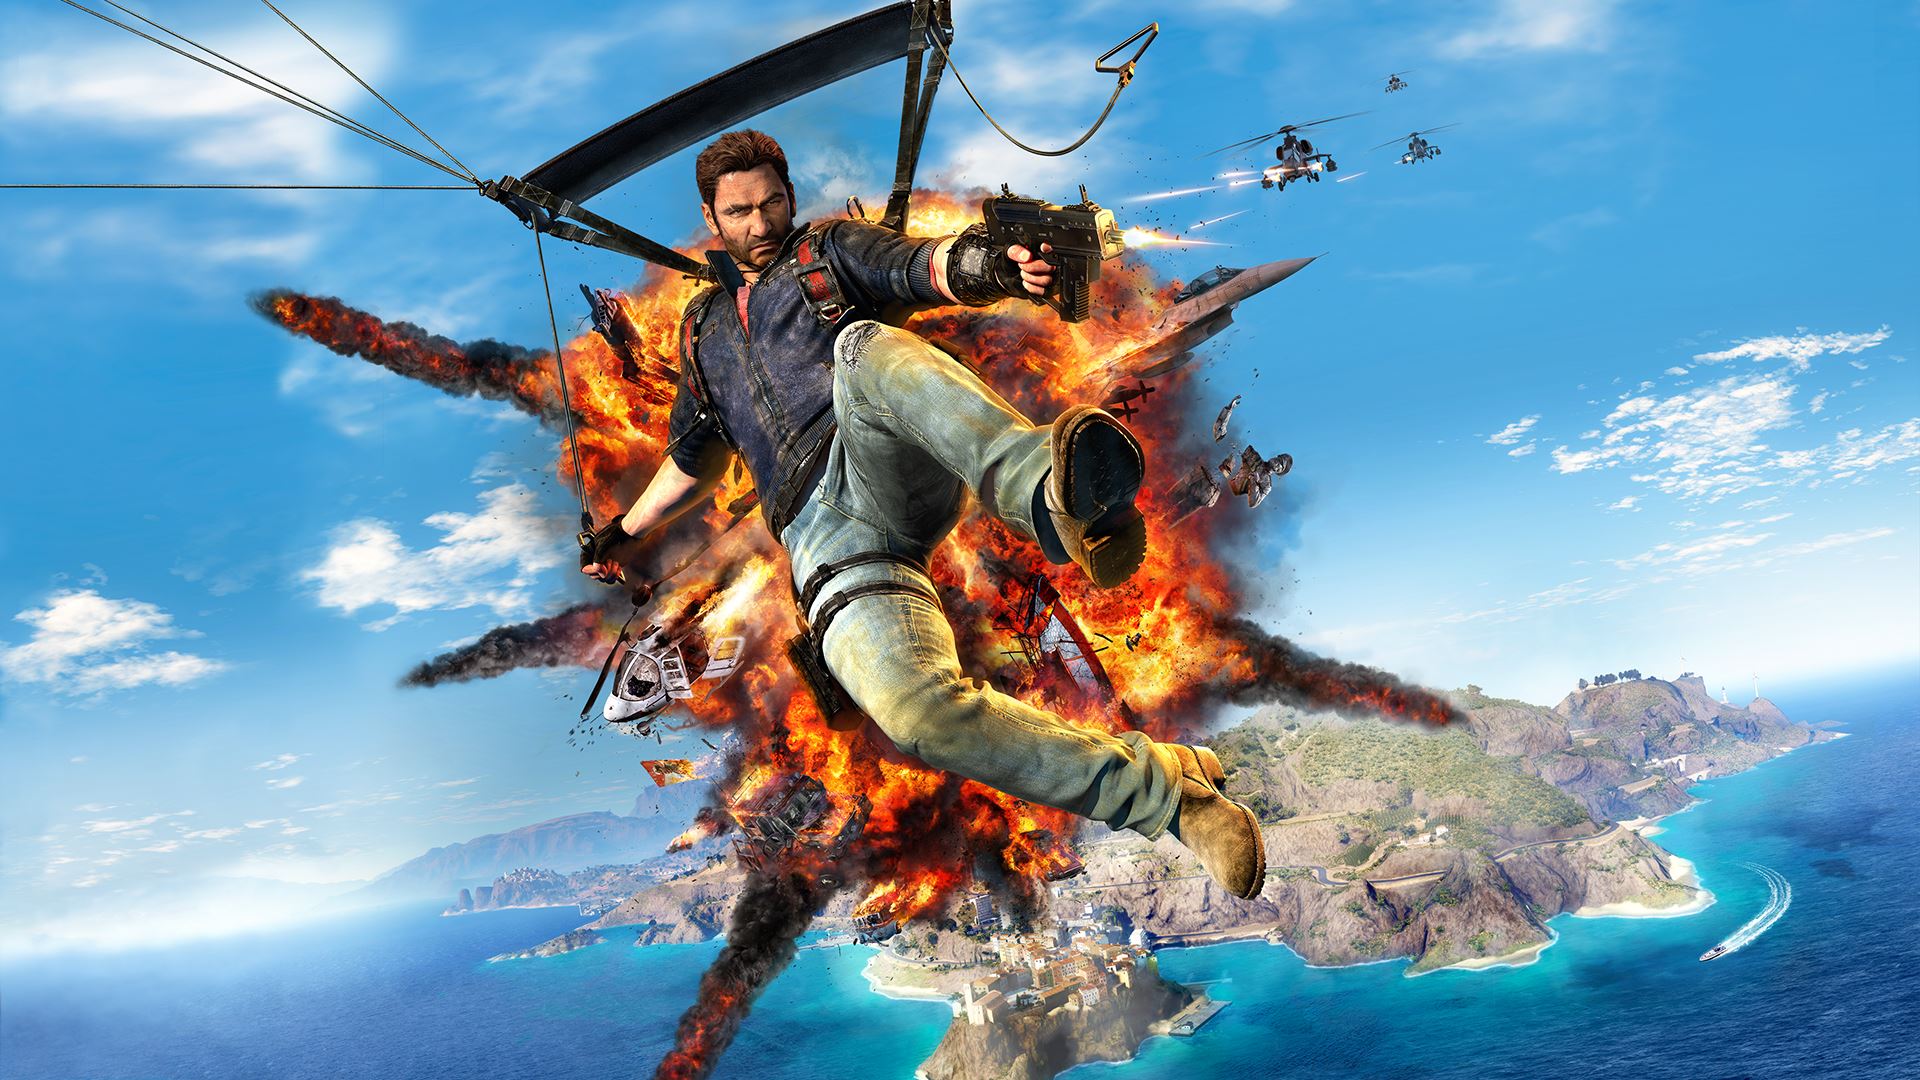 1920x1080 > Just Cause 3 Wallpapers